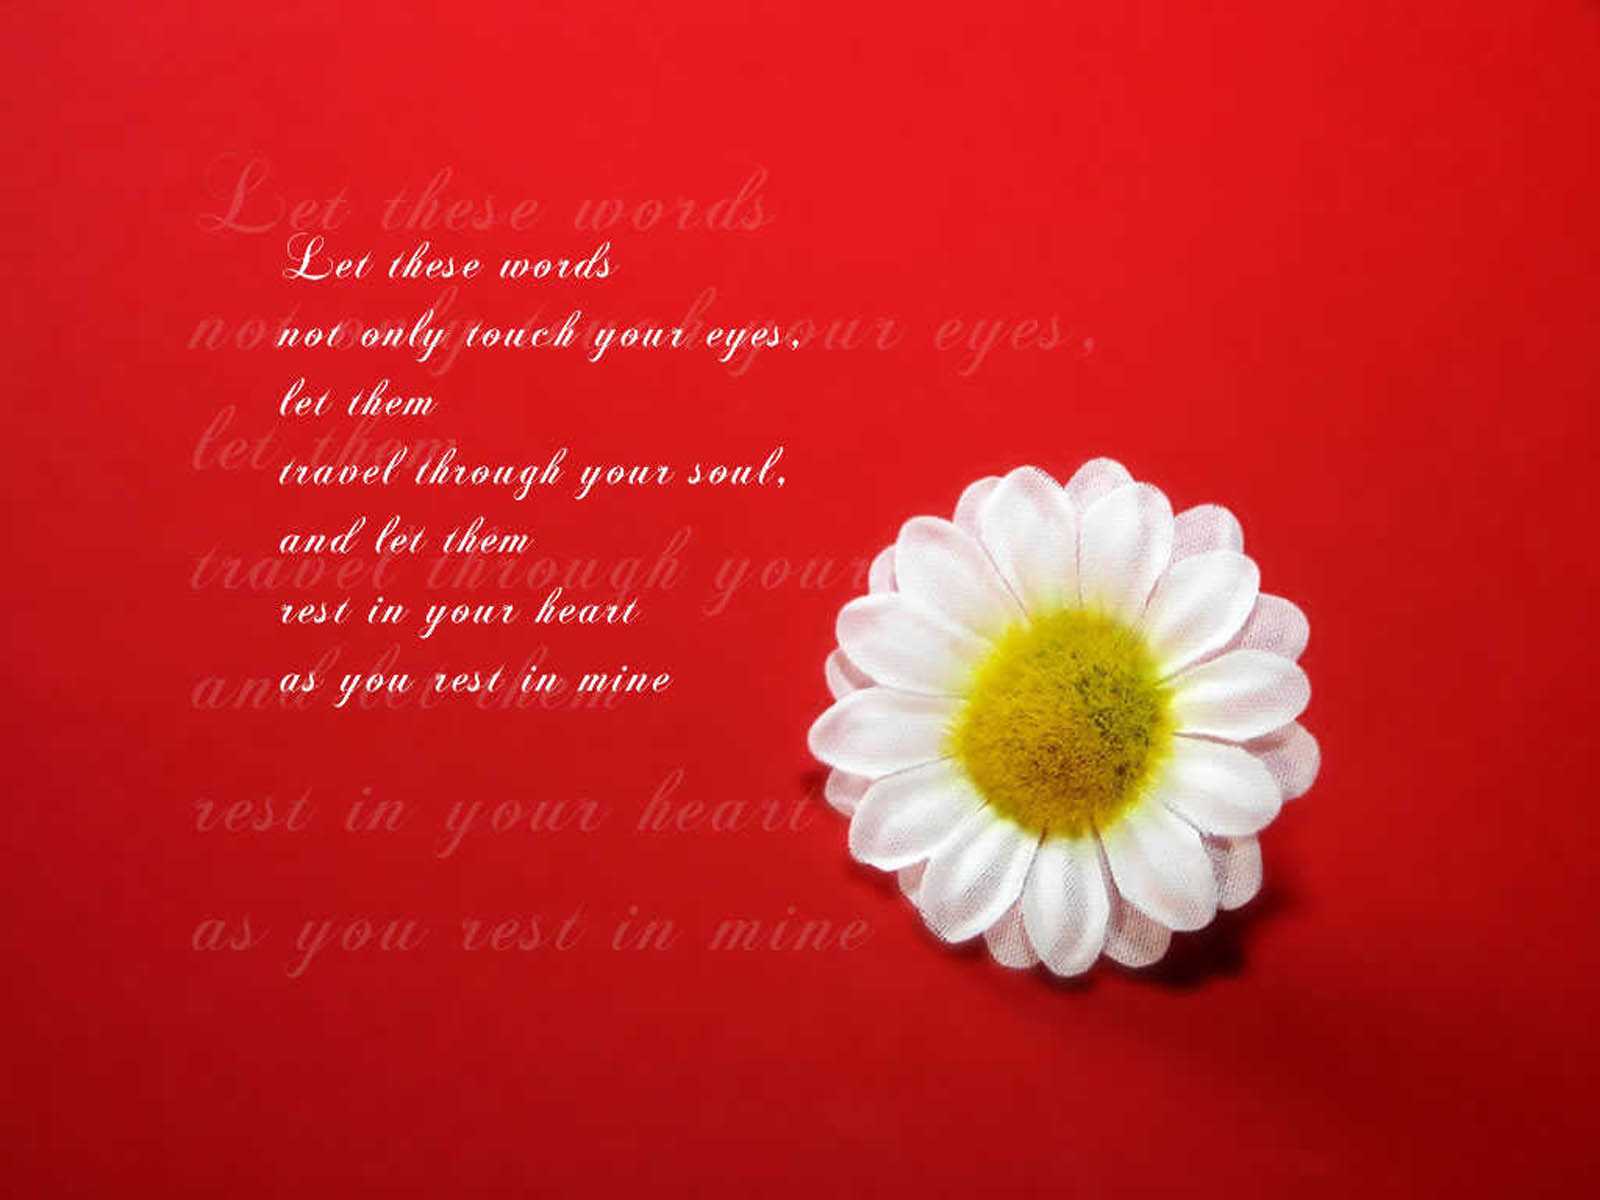 Love Quotes Wallpaper Desktop Image Amp Pictures Becuo